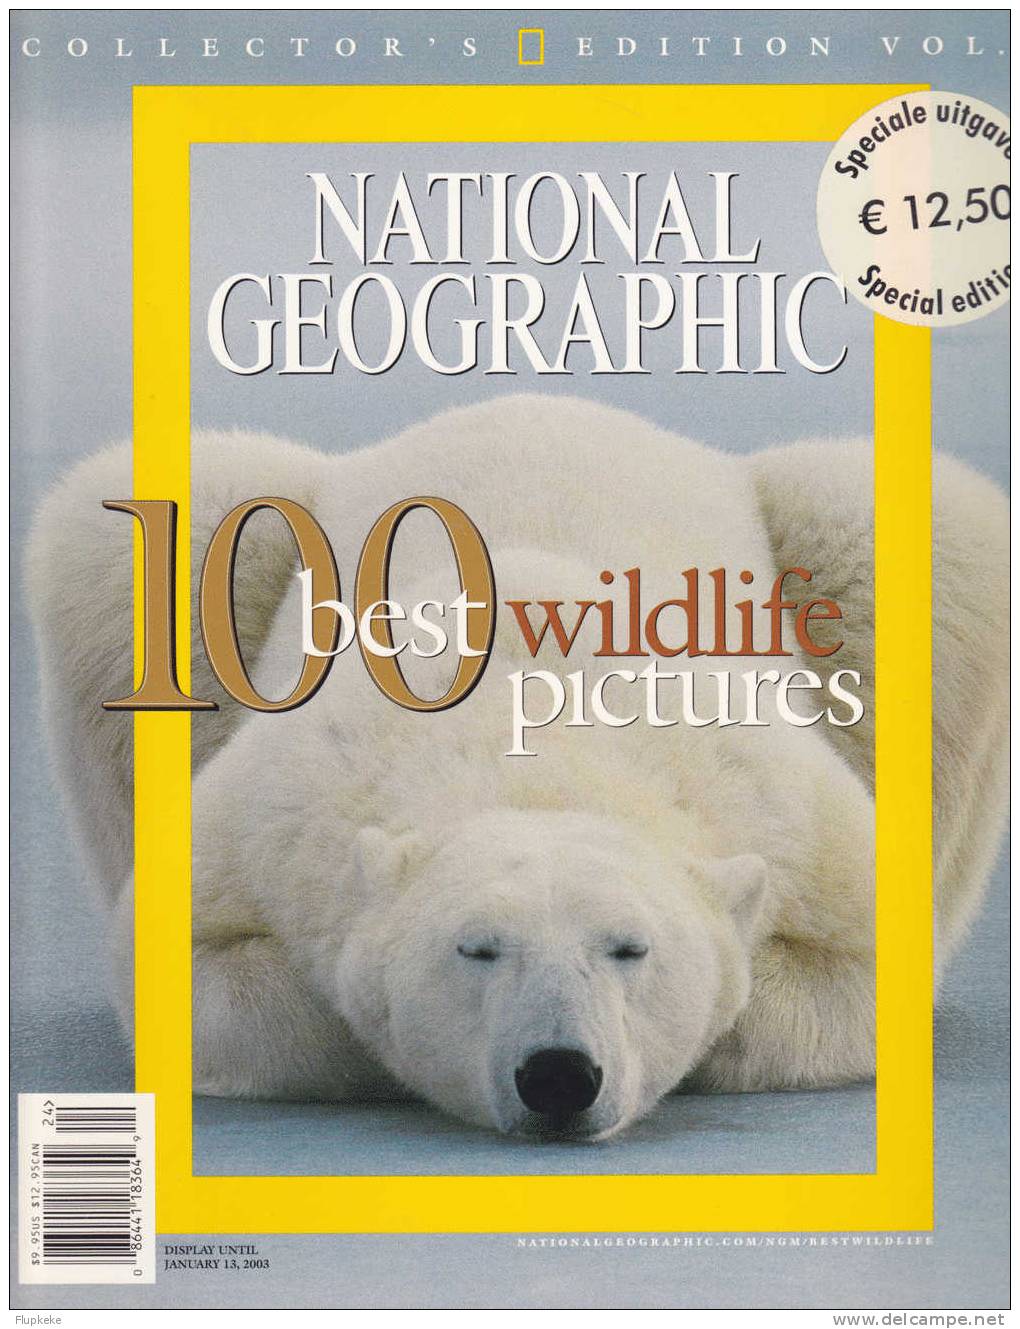 National Geographic Collector´s Edition Vol. 3 January 2003 - Reisen